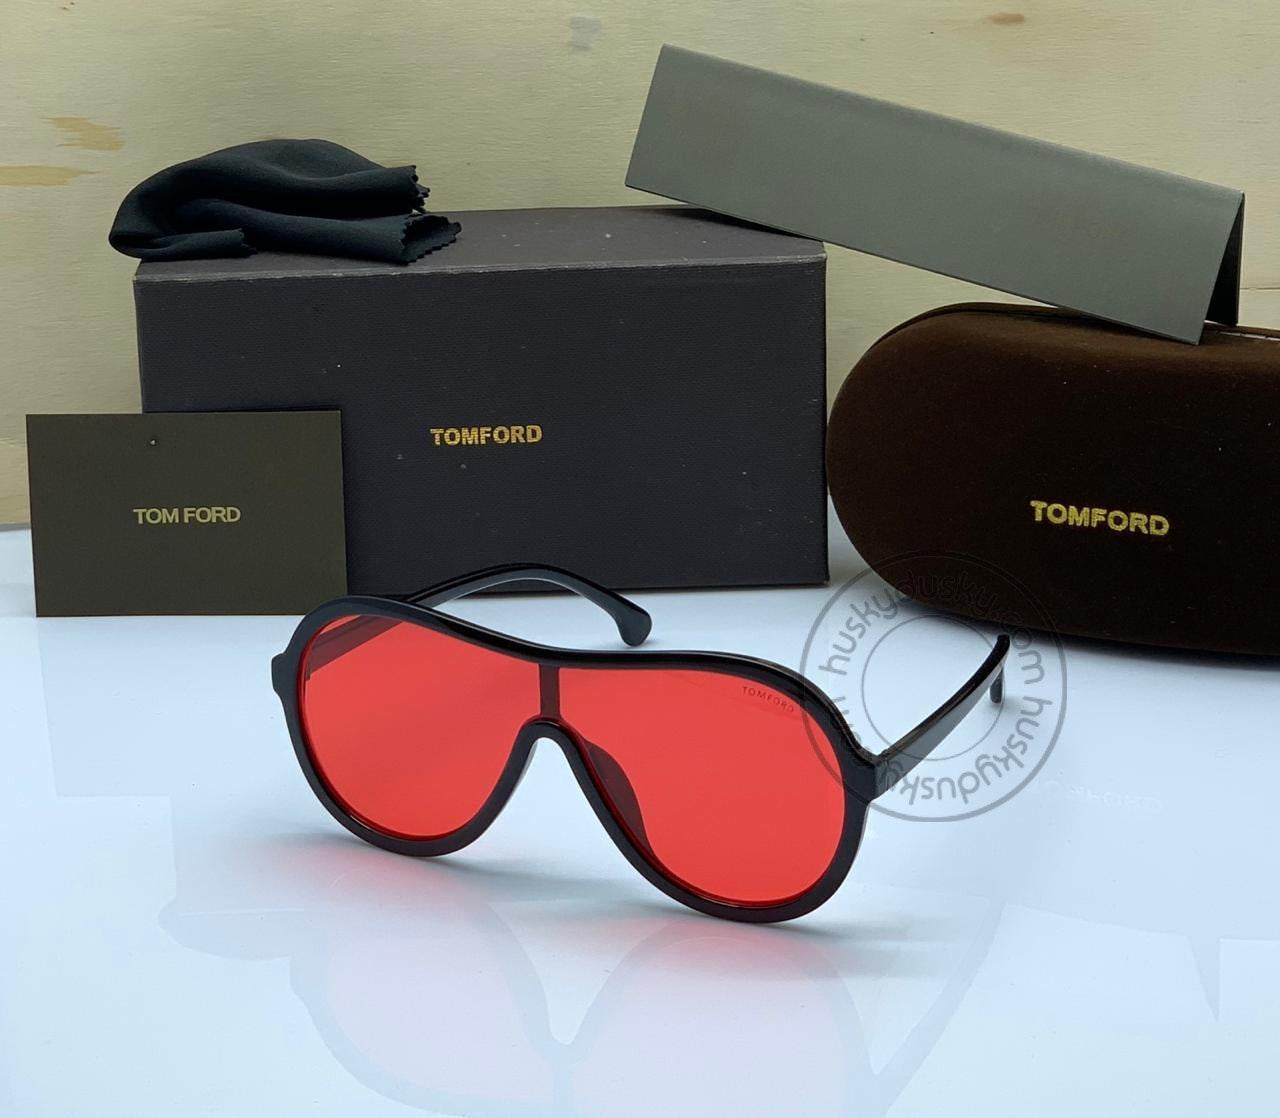 Tom Ford Latest Design Red Color Round Sunglass Men's Women's For Man Woman or Girl TF-310 Black Frame Sunglass